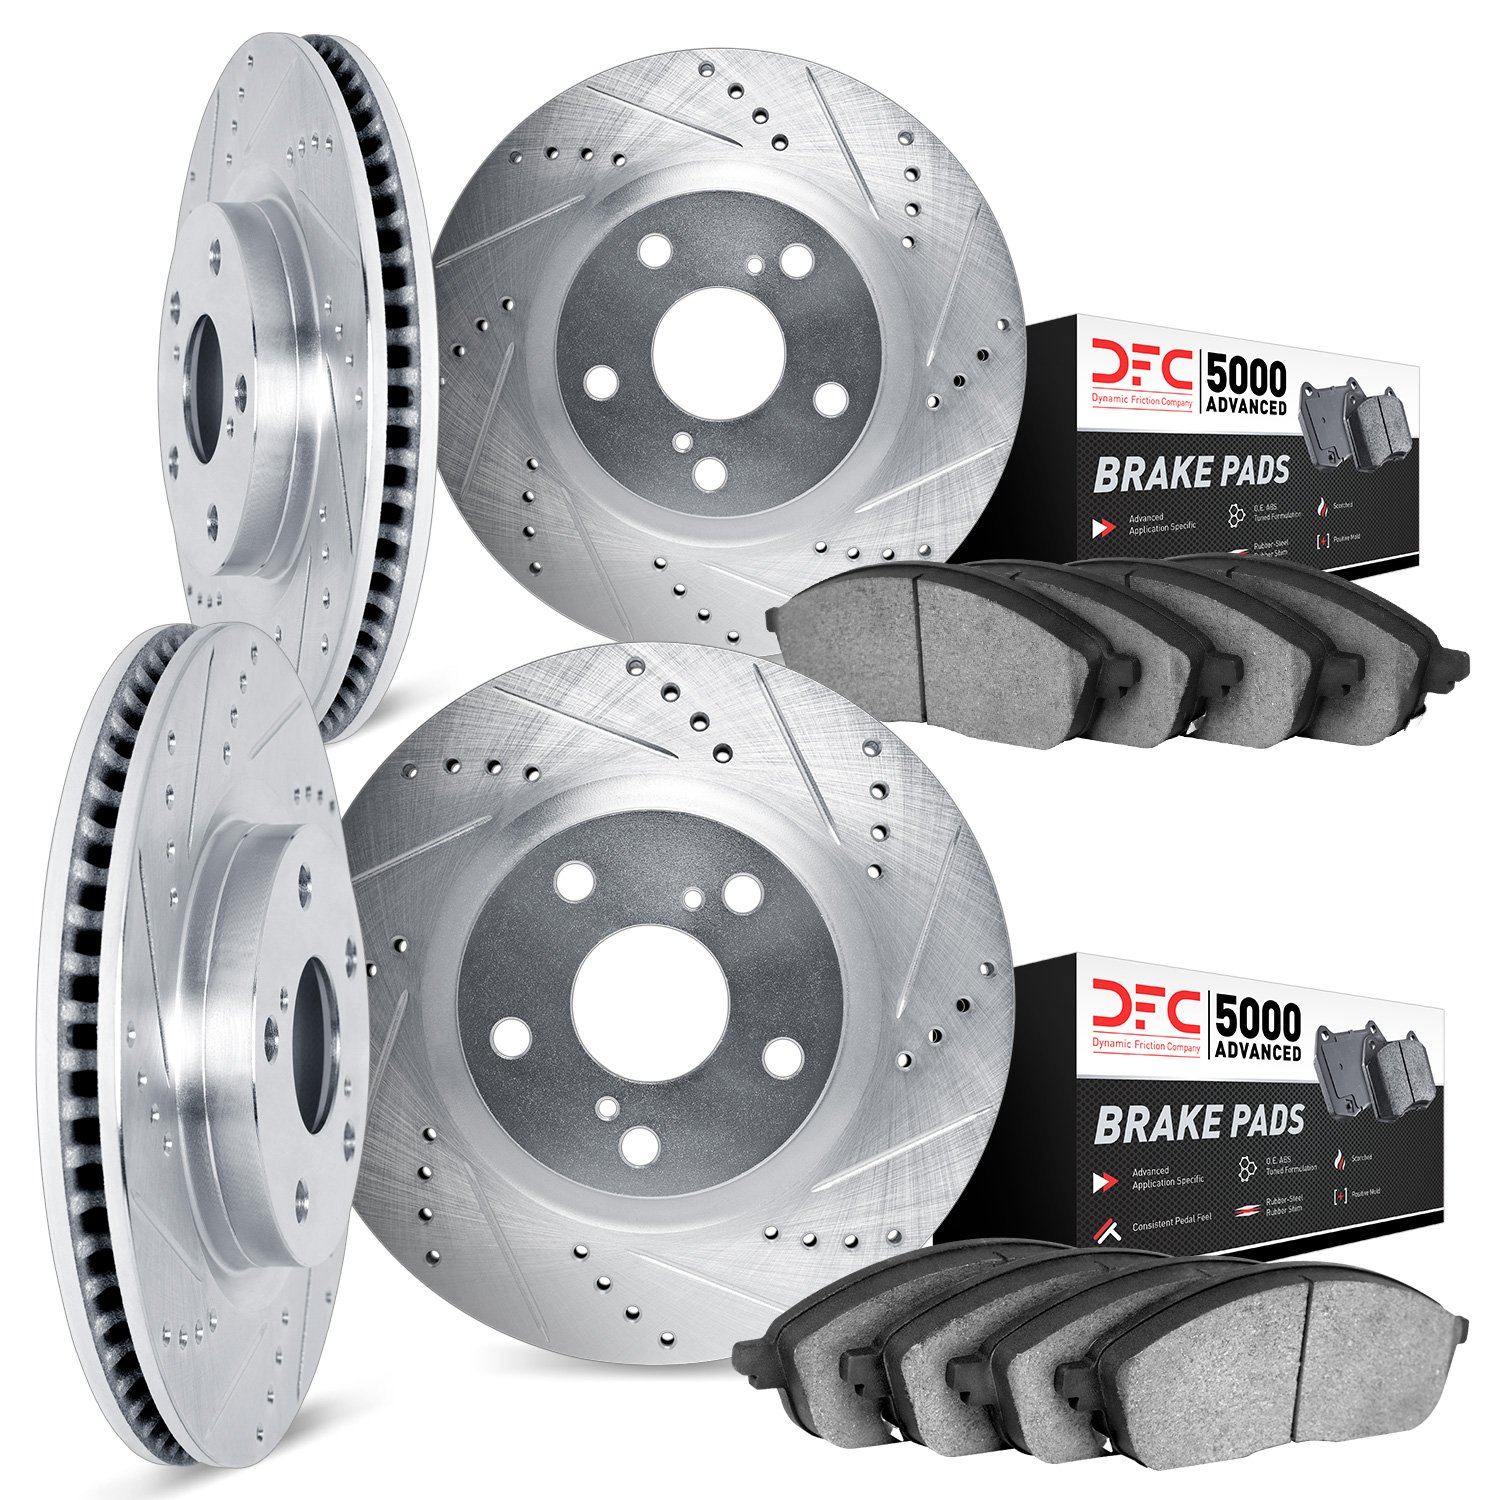 7504-68004 Drilled/Slotted Brake Rotors w/5000 Advanced Brake Pads Kit [Silver], 1997-2001 Infiniti/Nissan, Position: Front and